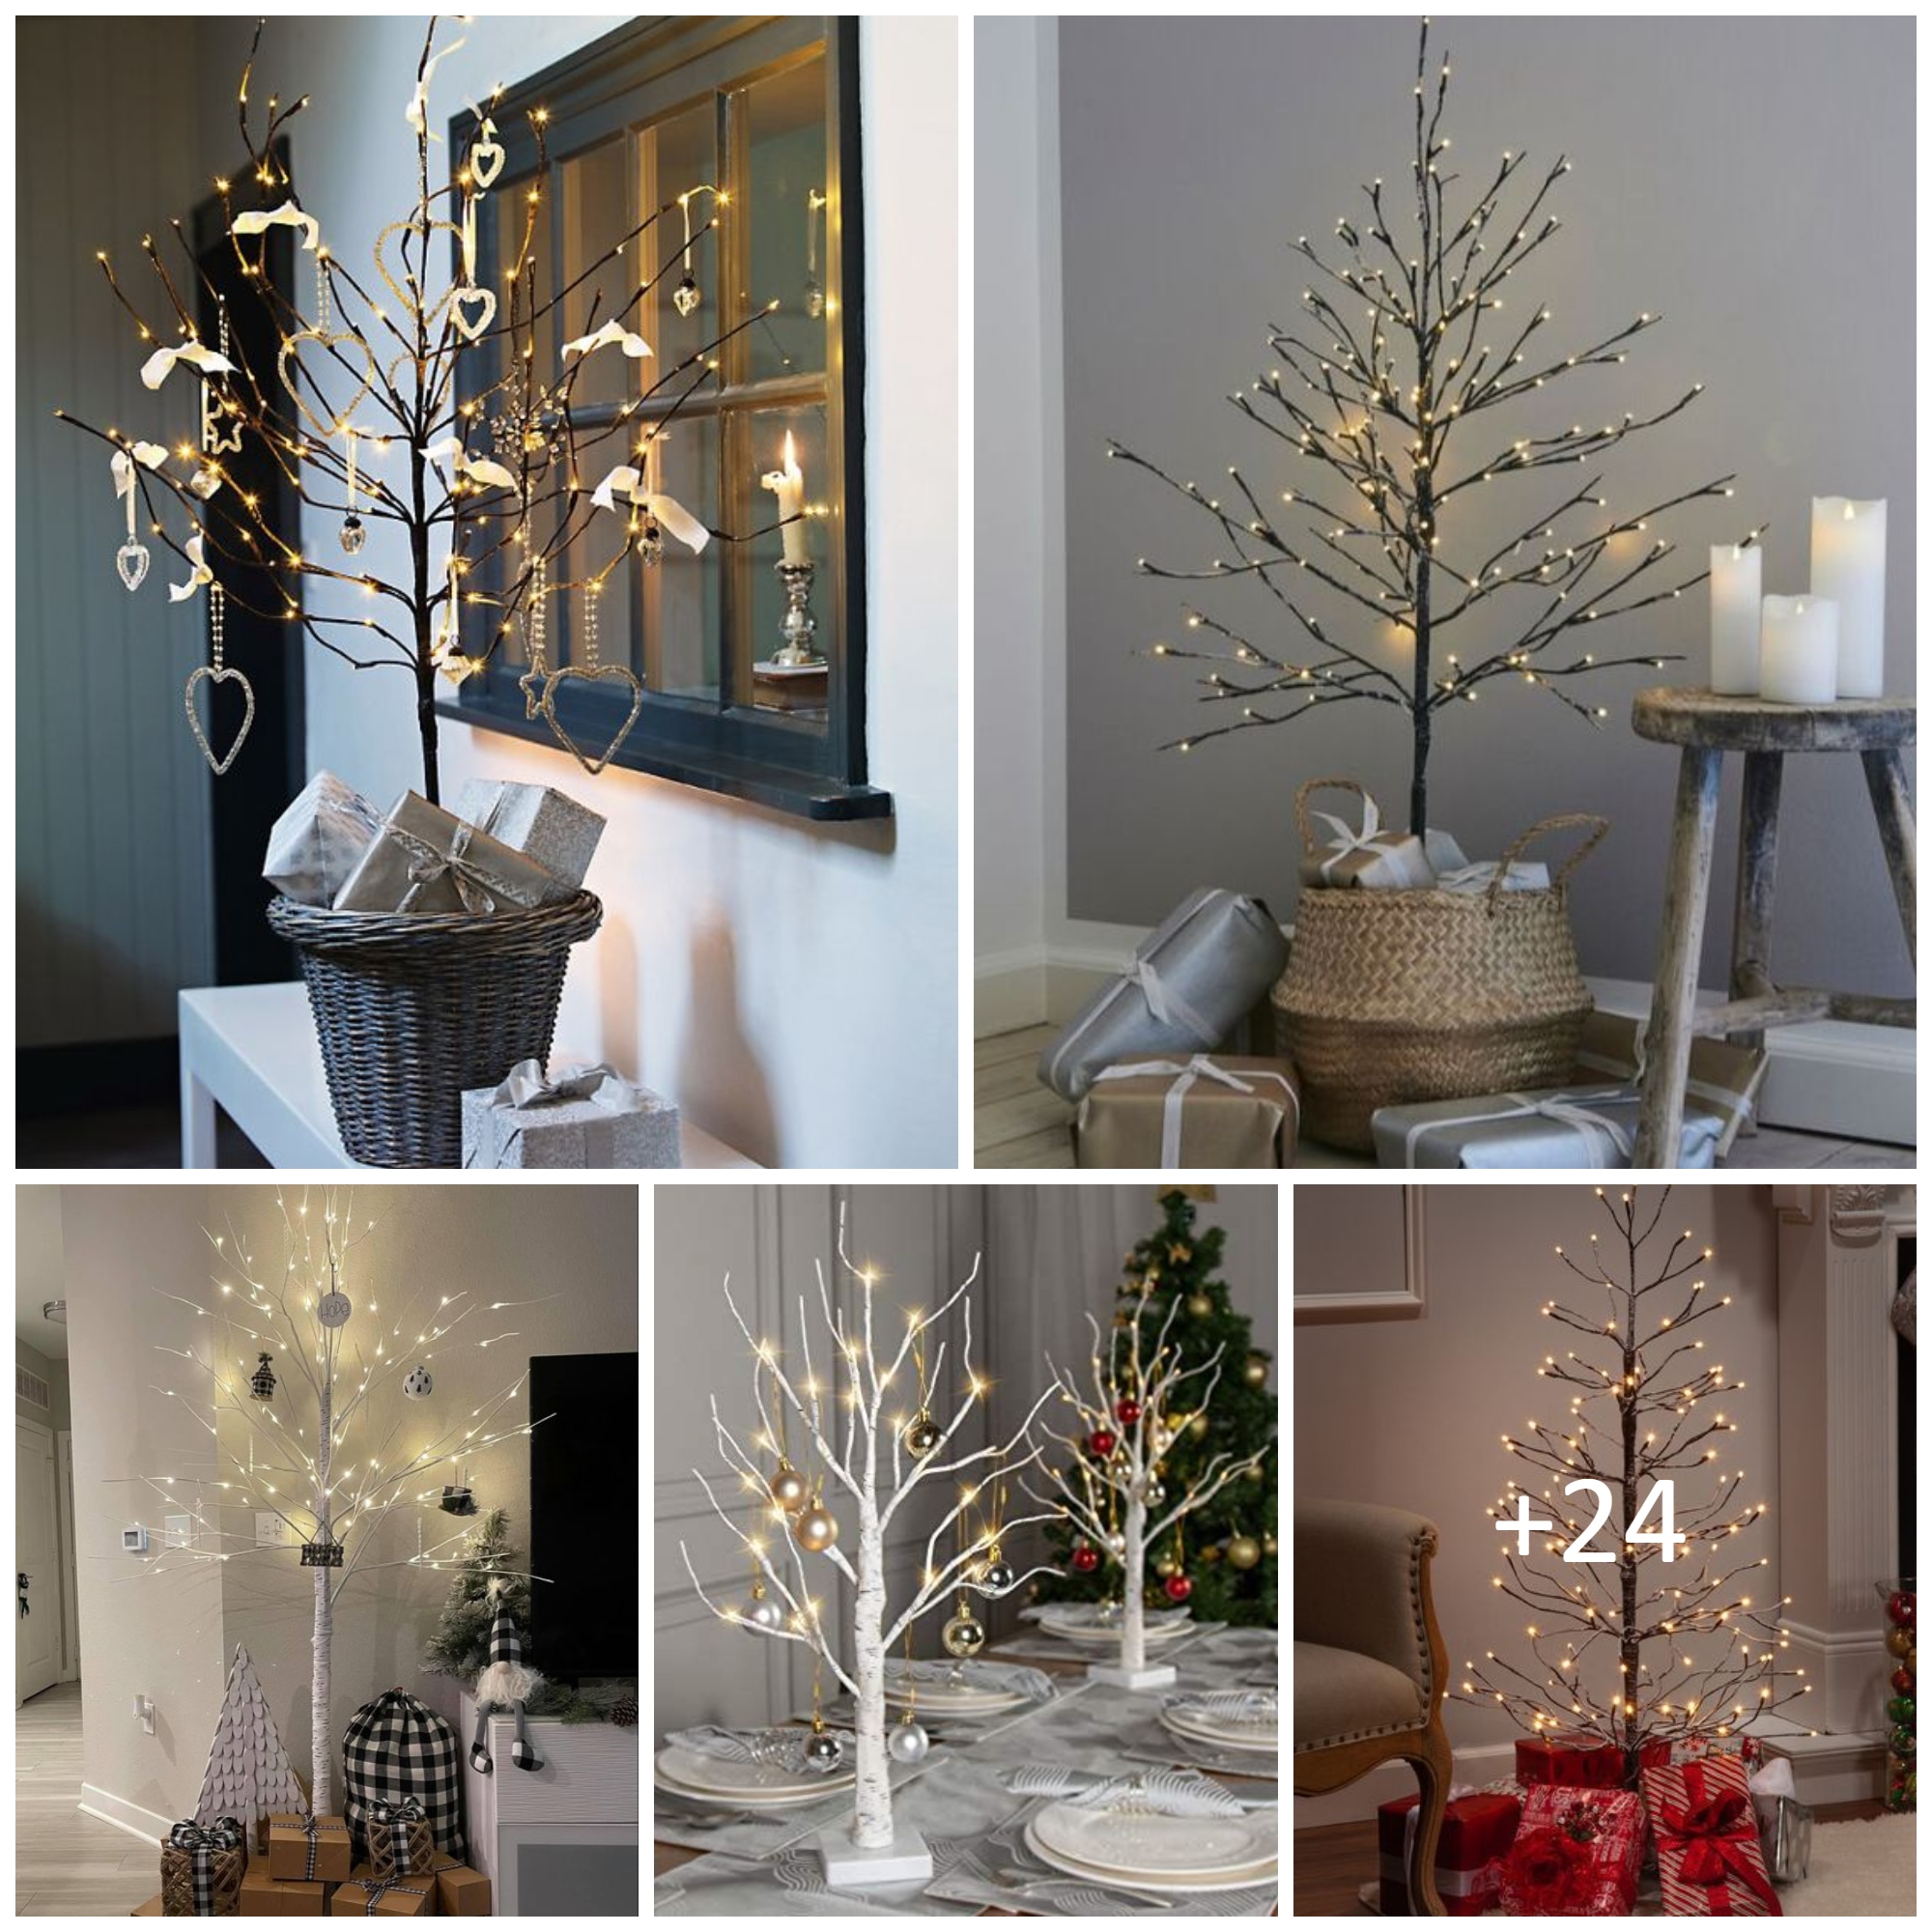 How to use small twigs as a background for Christmas decorations: Great inspirational ideas